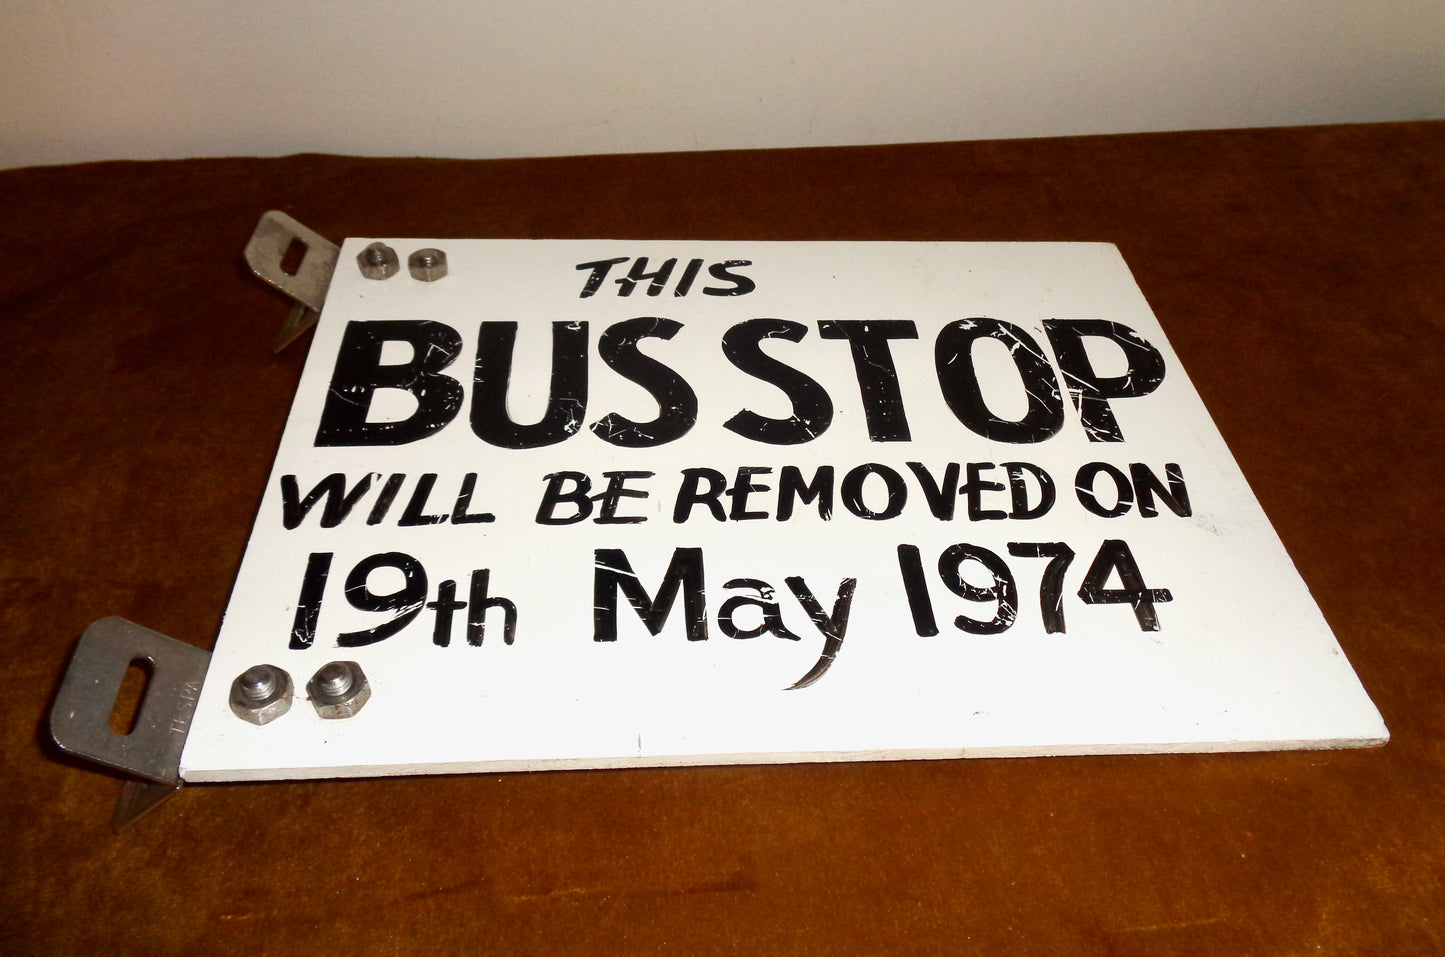 1974 Double Sided Bus Stop Removal Sign In White Resin With Metal Mounting Brackets